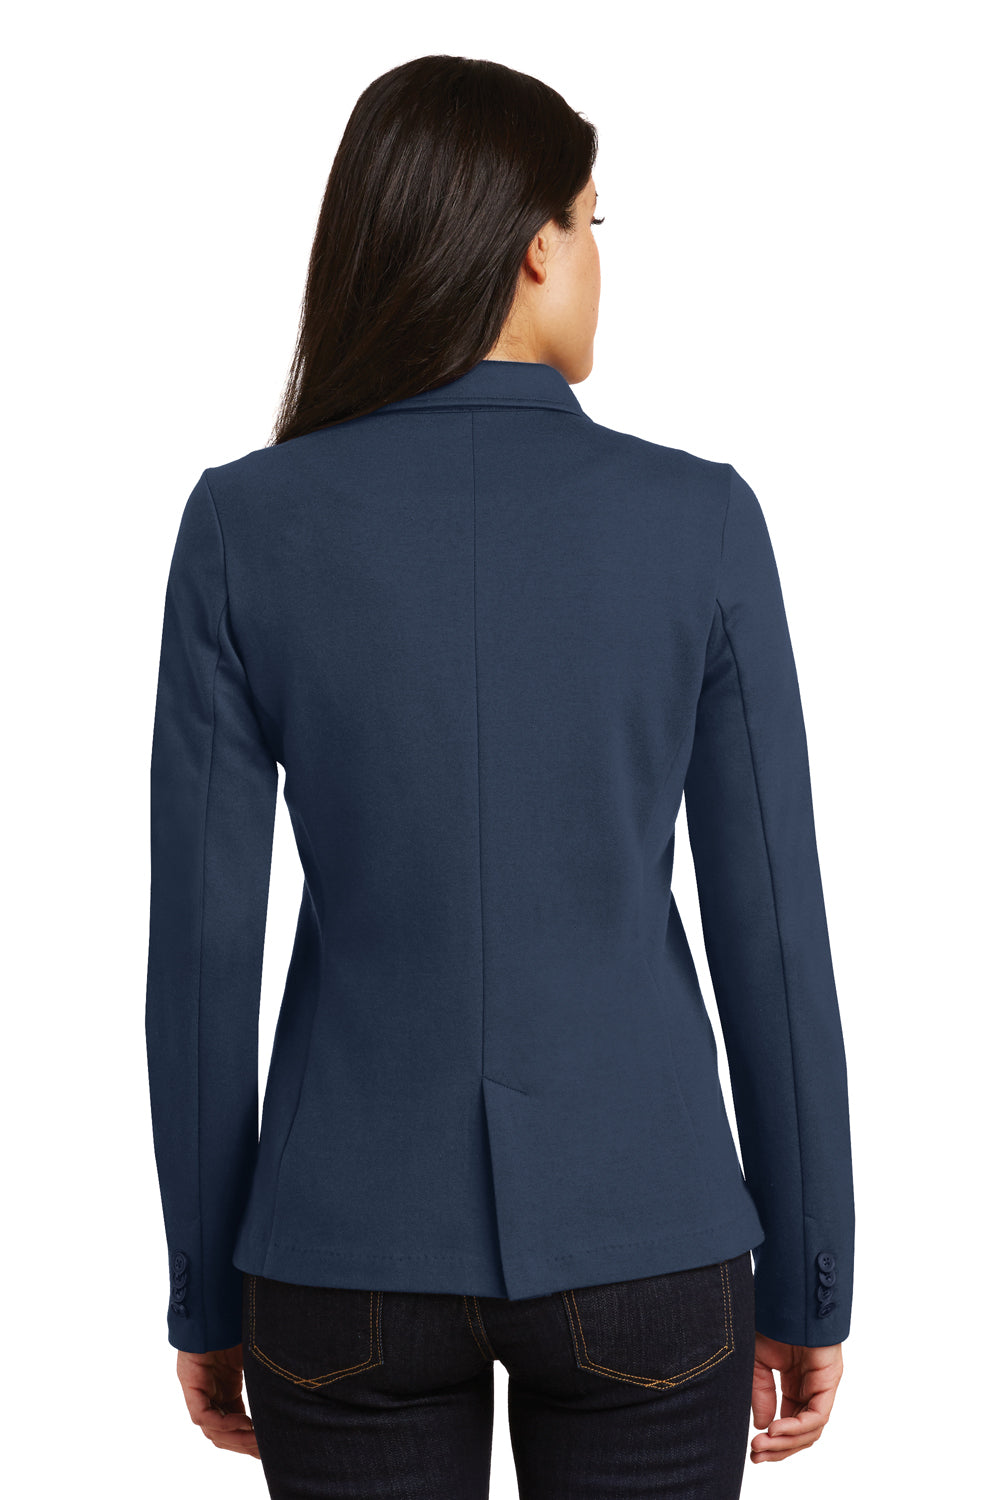 Port Authority LM2000 Womens Knit Button Down Blazer Navy Blue Back